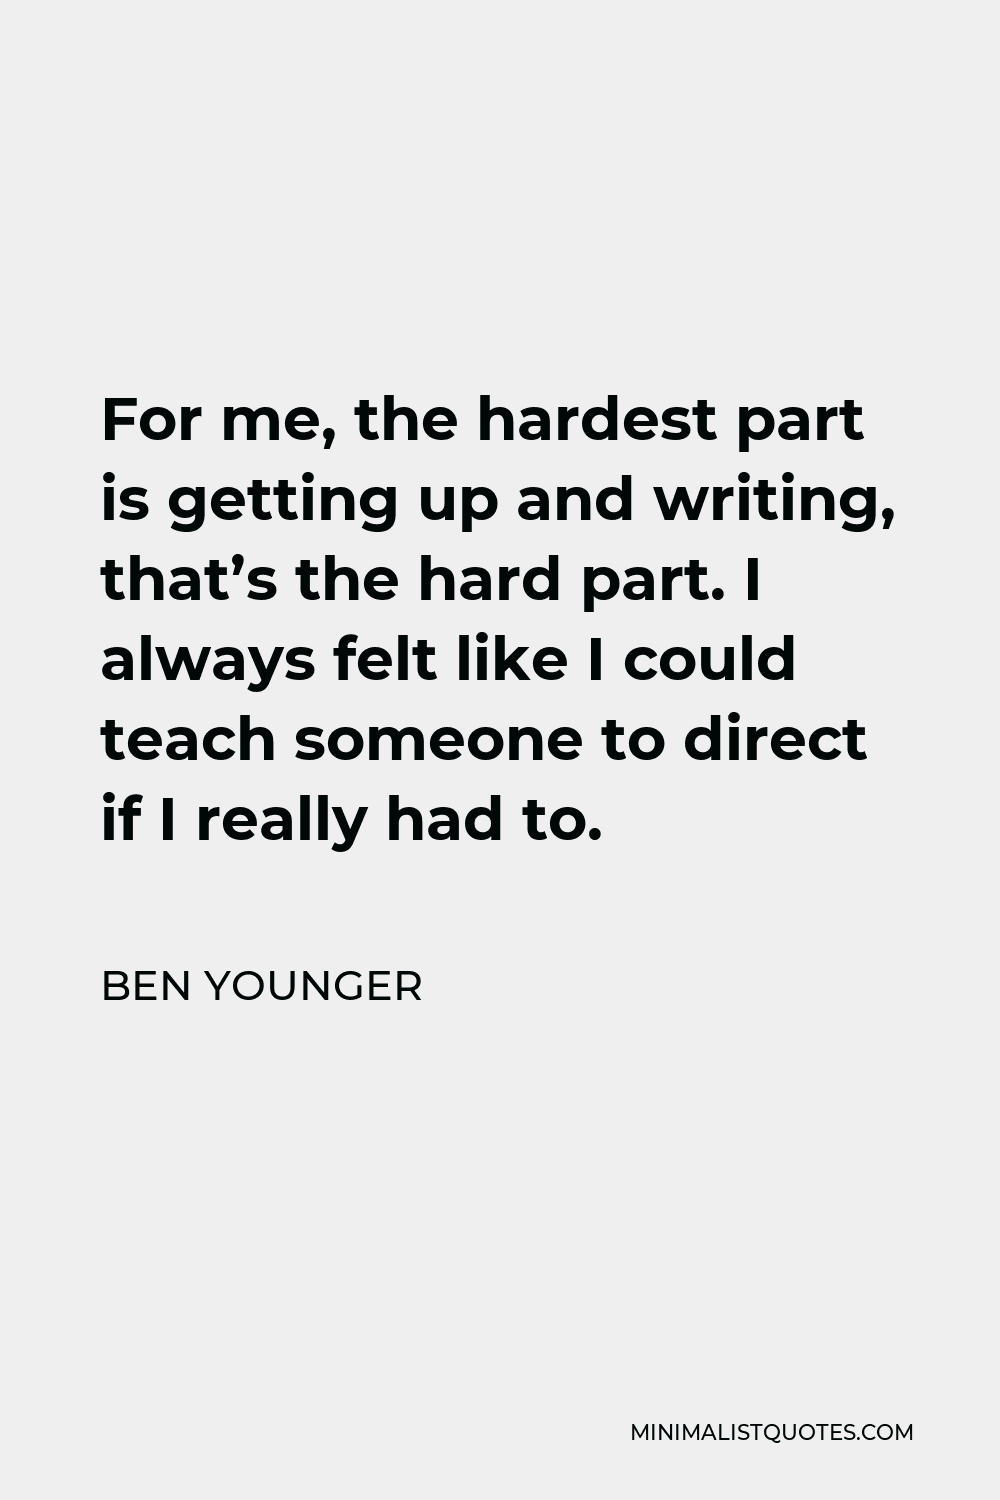 Ben Younger Quote - For me, the hardest part is getting up and writing, that’s the hard part. I always felt like I could teach someone to direct if I really had to.